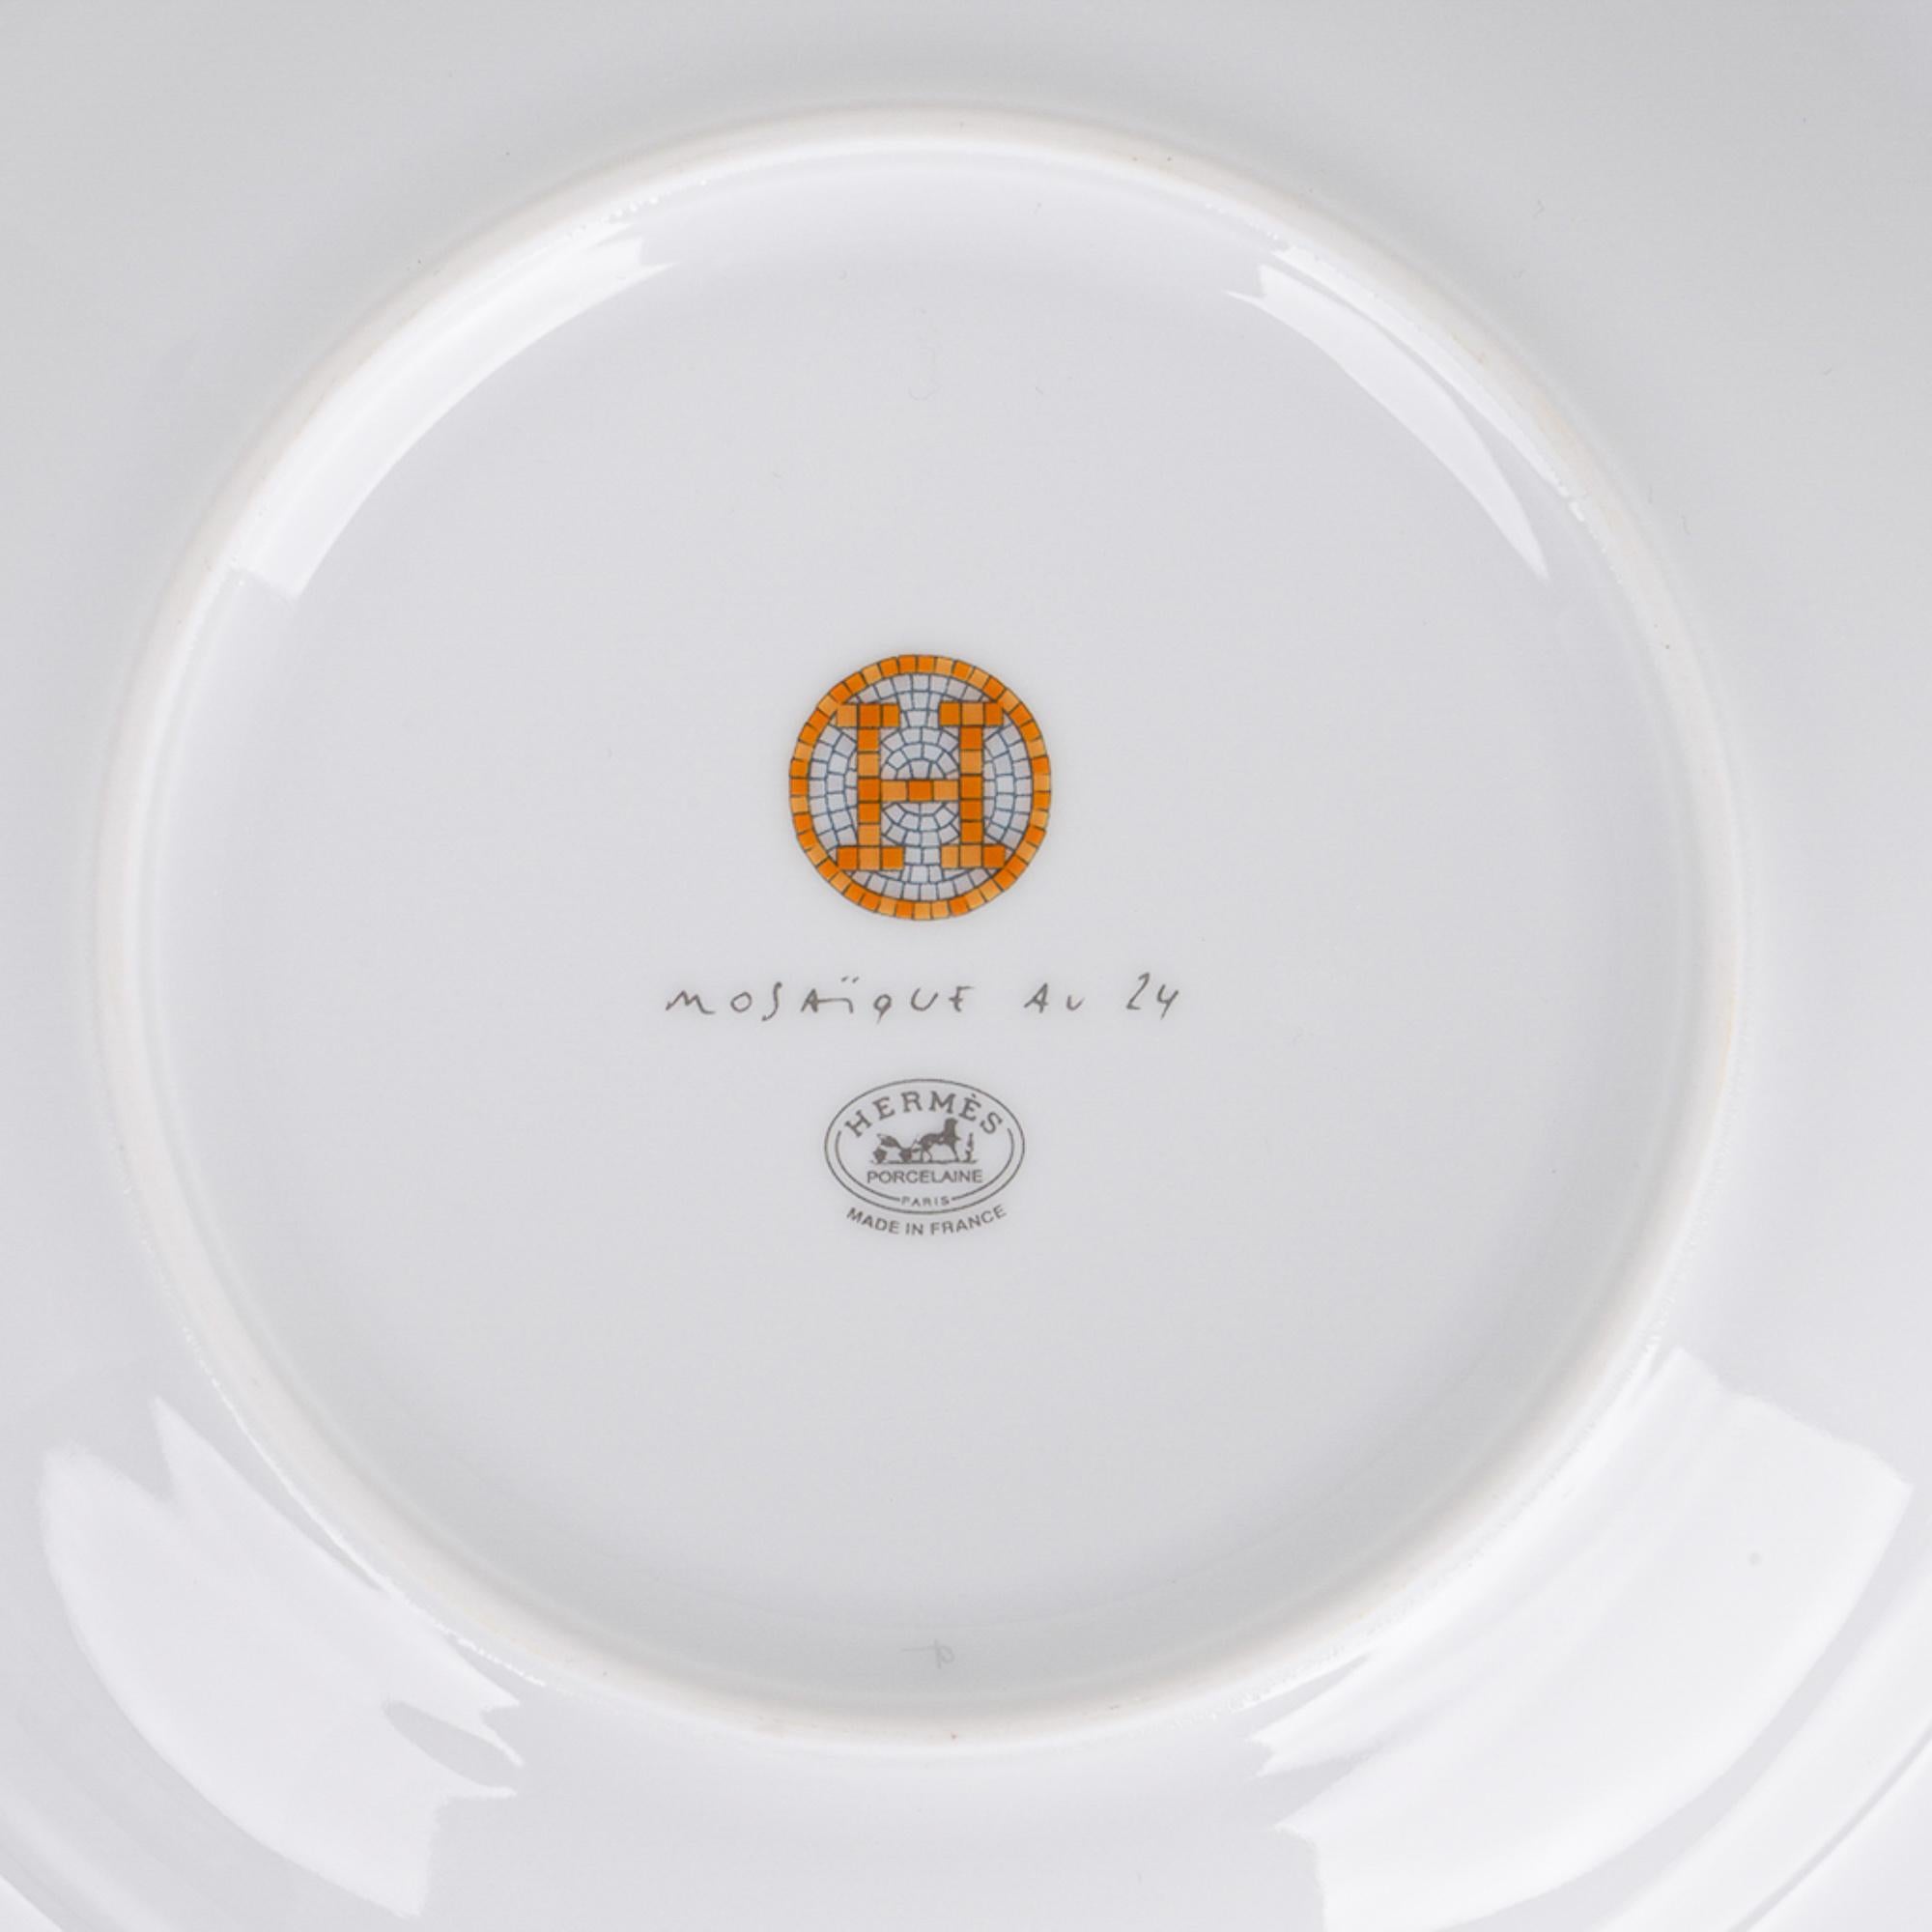 Hermes Mosaique Au 24 Soup Plate Gold Set of 2 New w/Box In New Condition For Sale In Miami, FL